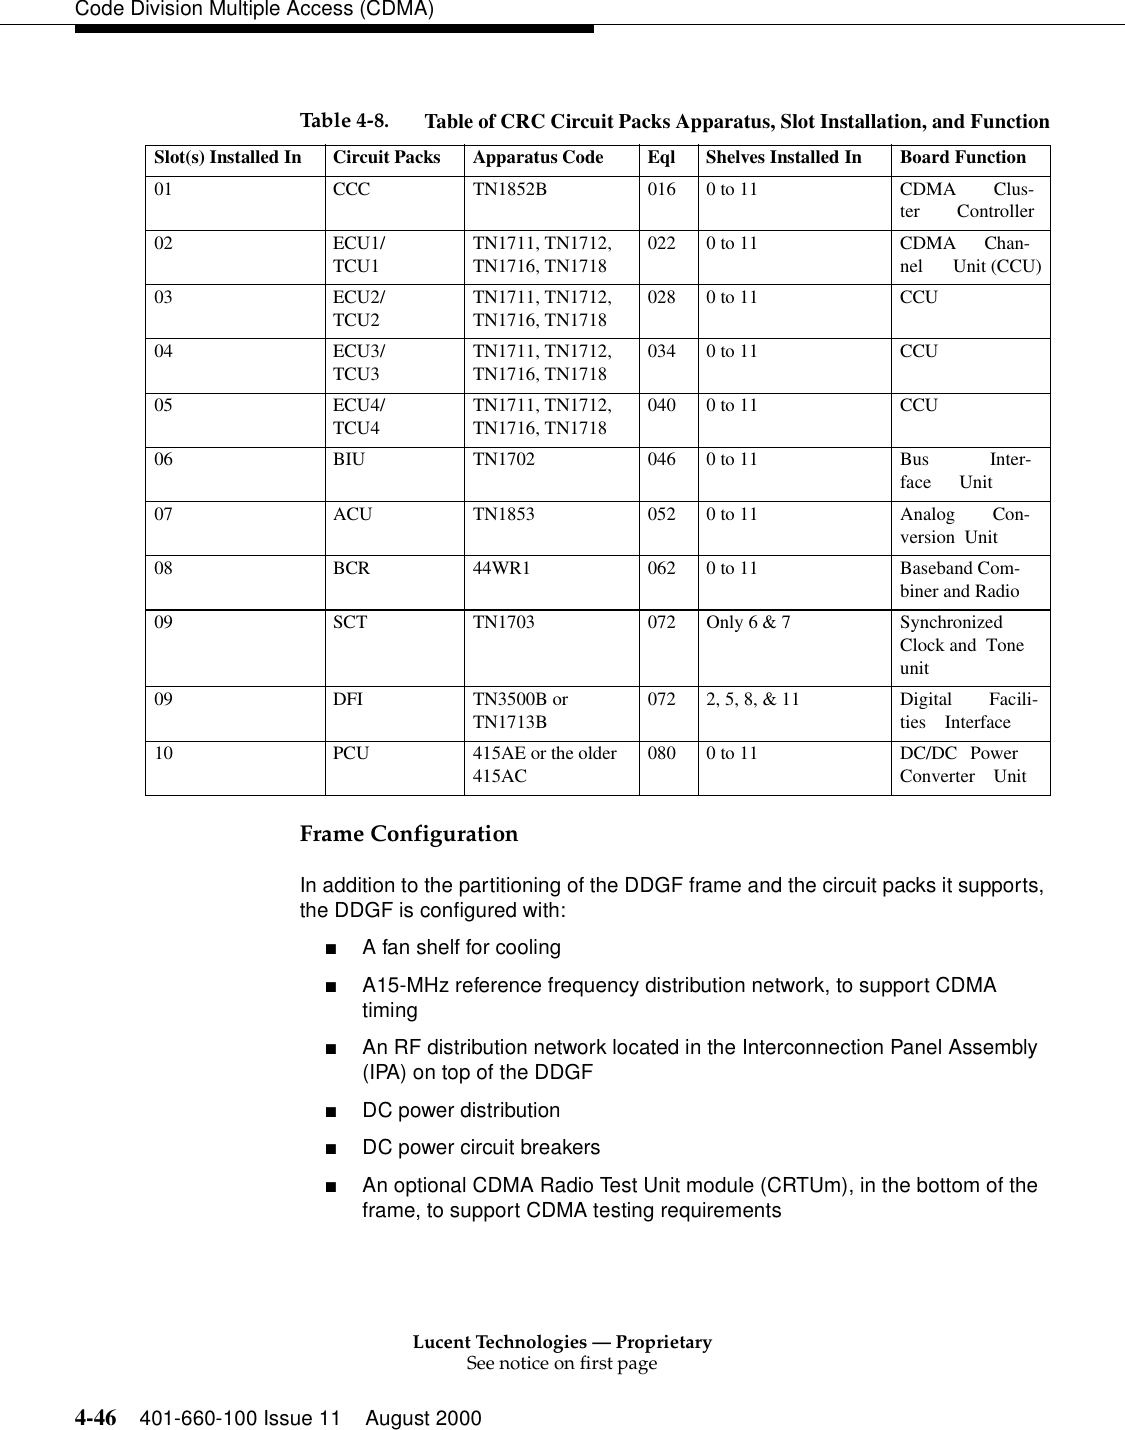 Lucent Technologies — ProprietarySee notice on first page4-46 401-660-100 Issue 11 August 2000Code Division Multiple Access (CDMA)Frame ConfigurationIn addition to the partitioning of the DDGF frame and the circuit packs it supports, the DDGF is configured with:■A fan shelf for cooling■A15-MHz reference frequency distribution network, to support CDMA timing■An RF distribution network located in the Interconnection Panel Assembly (IPA) on top of the DDGF■DC power distribution■DC power circuit breakers■An optional CDMA Radio Test Unit module (CRTUm), in the bottom of the frame, to support CDMA testing requirementsTable 4-8. Table of CRC Circuit Packs Apparatus, Slot Installation, and FunctionSlot(s) Installed In Circuit Packs Apparatus Code Eql Shelves Installed In Board Function01 CCC TN1852B 016 0 to 11 CDMA        Clus-ter        Controller02 ECU1/TCU1TN1711, TN1712, TN1716, TN1718022 0 to 11 CDMA      Chan-nel       Unit (CCU)03 ECU2/TCU2TN1711, TN1712, TN1716, TN1718028 0 to 11 CCU04 ECU3/TCU3TN1711, TN1712, TN1716, TN1718034 0 to 11 CCU05 ECU4/TCU4TN1711, TN1712, TN1716, TN1718040 0 to 11 CCU06 BIU TN1702 046 0 to 11 Bus             Inter-face      Unit07 ACU TN1853 052 0 to 11 Analog        Con-version  Unit08 BCR 44WR1 062 0 to 11 Baseband Com-biner and Radio09 SCT TN1703 072 Only 6 &amp; 7 Synchronized Clock and  Tone unit09 DFI TN3500B or TN1713B072 2, 5, 8, &amp; 11 Digital        Facili-ties    Interface10 PCU 415AE or the older 415AC08 0 0  to  11 DC /DC     P ower          Converter    Unit